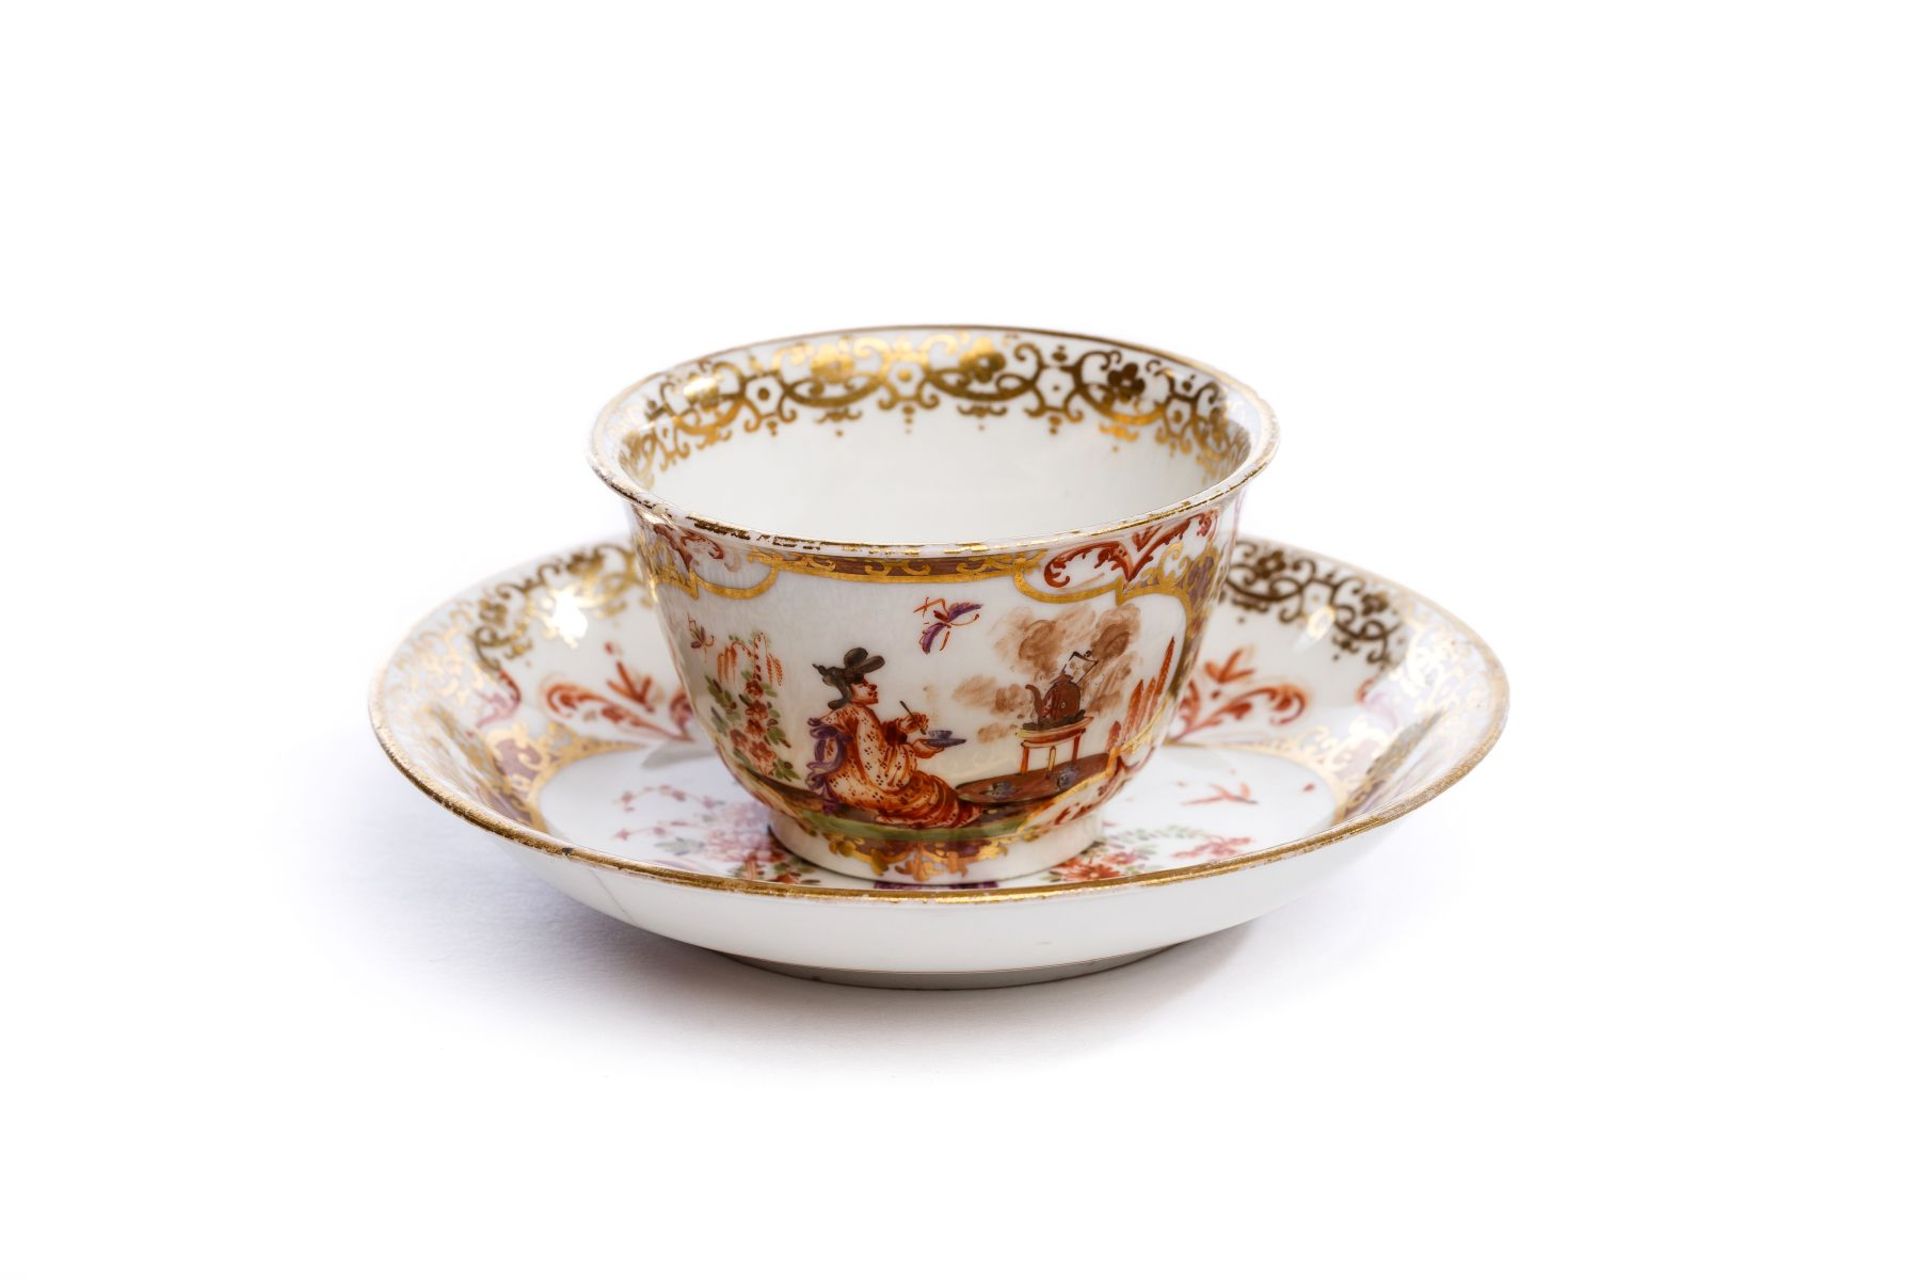 Bowl with Saucer, Meissen 1725 - Image 3 of 5